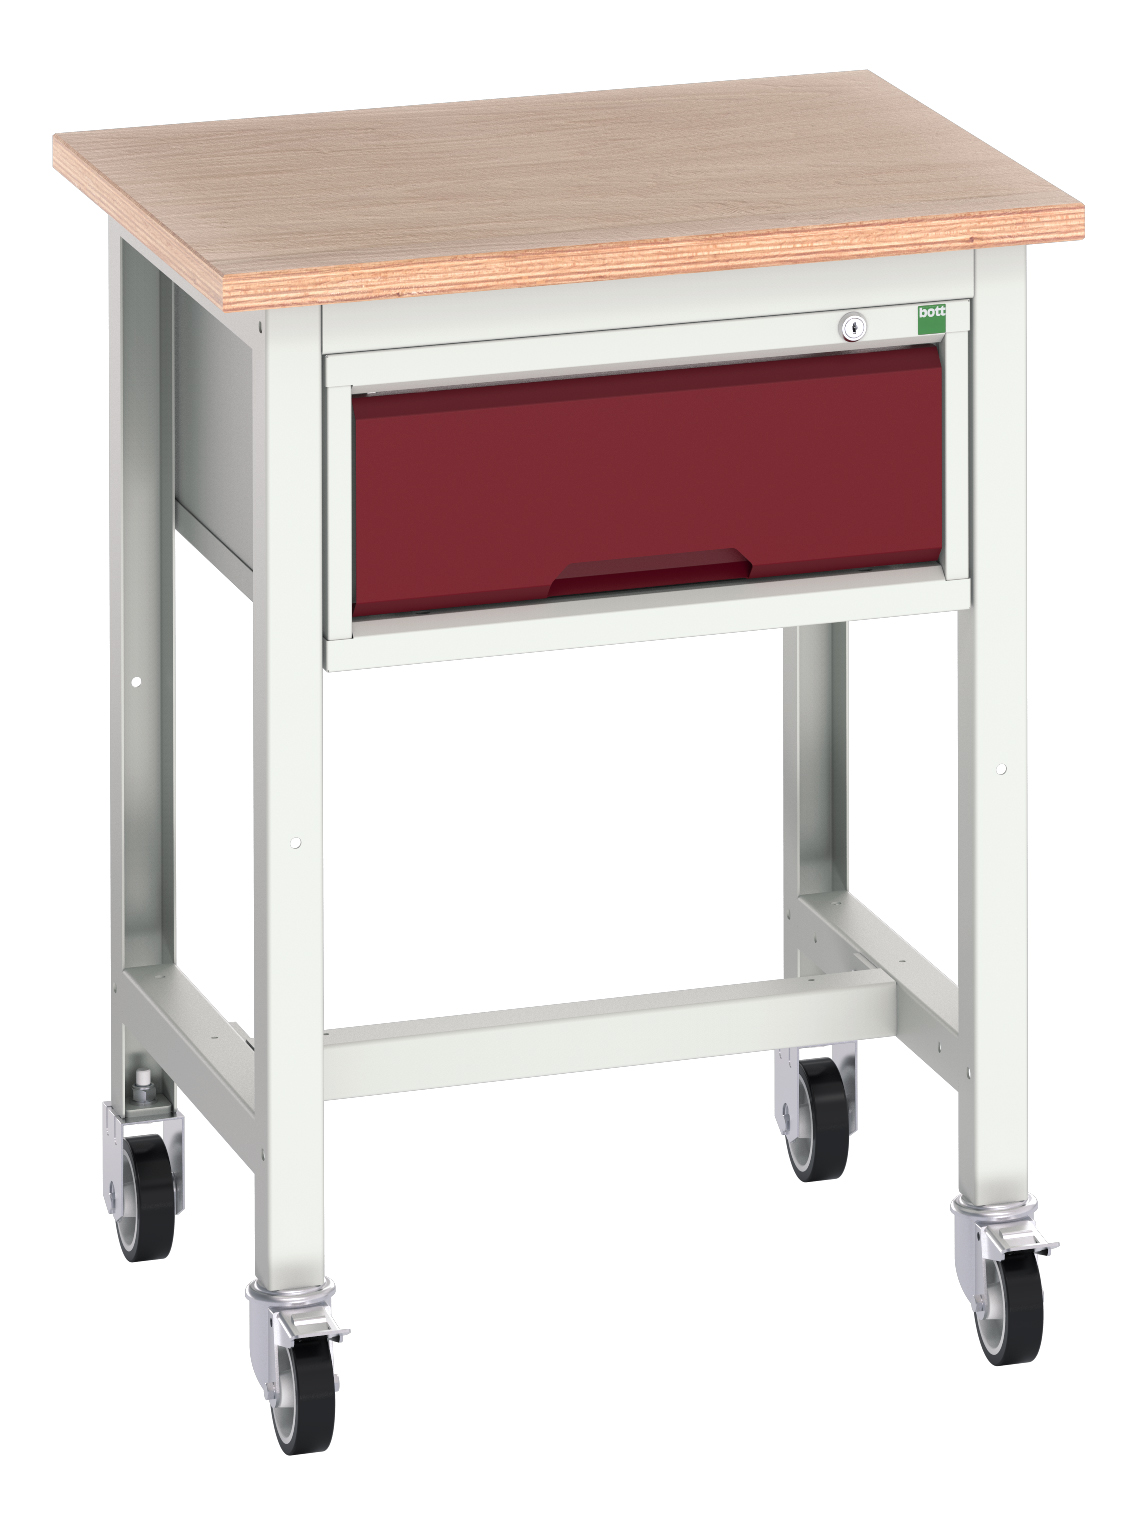 Bott Verso Mobile Workstand With 1 Drawer Cabinet - 16922200.24